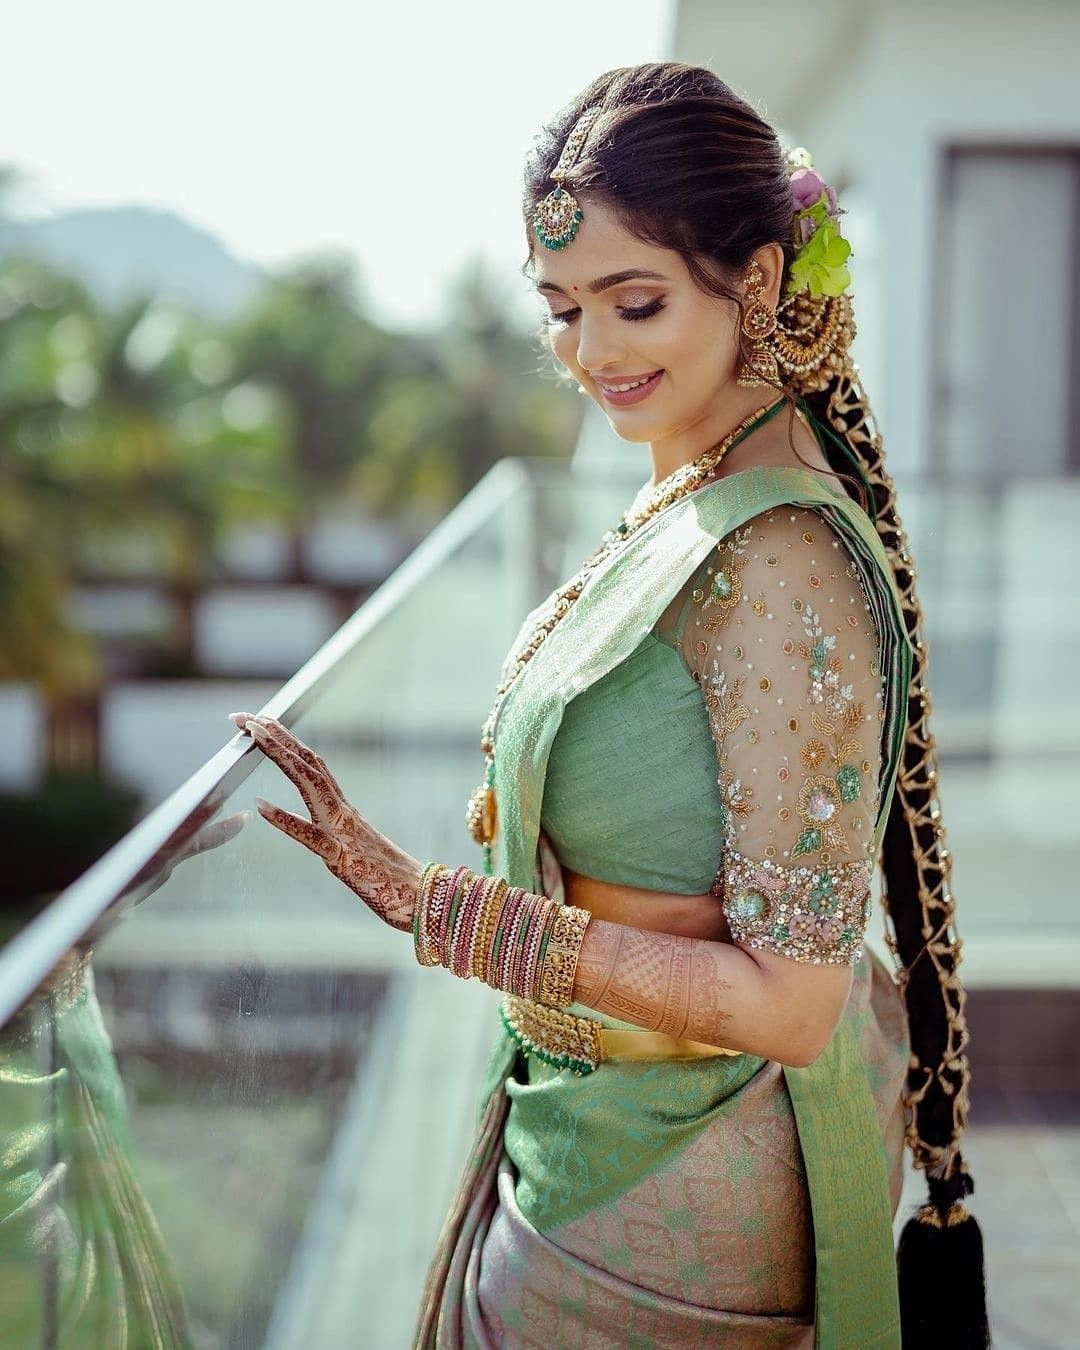 Hairstyle Ideas for a Kerala Bride With Short Hair – @weddingculture on  Tumblr